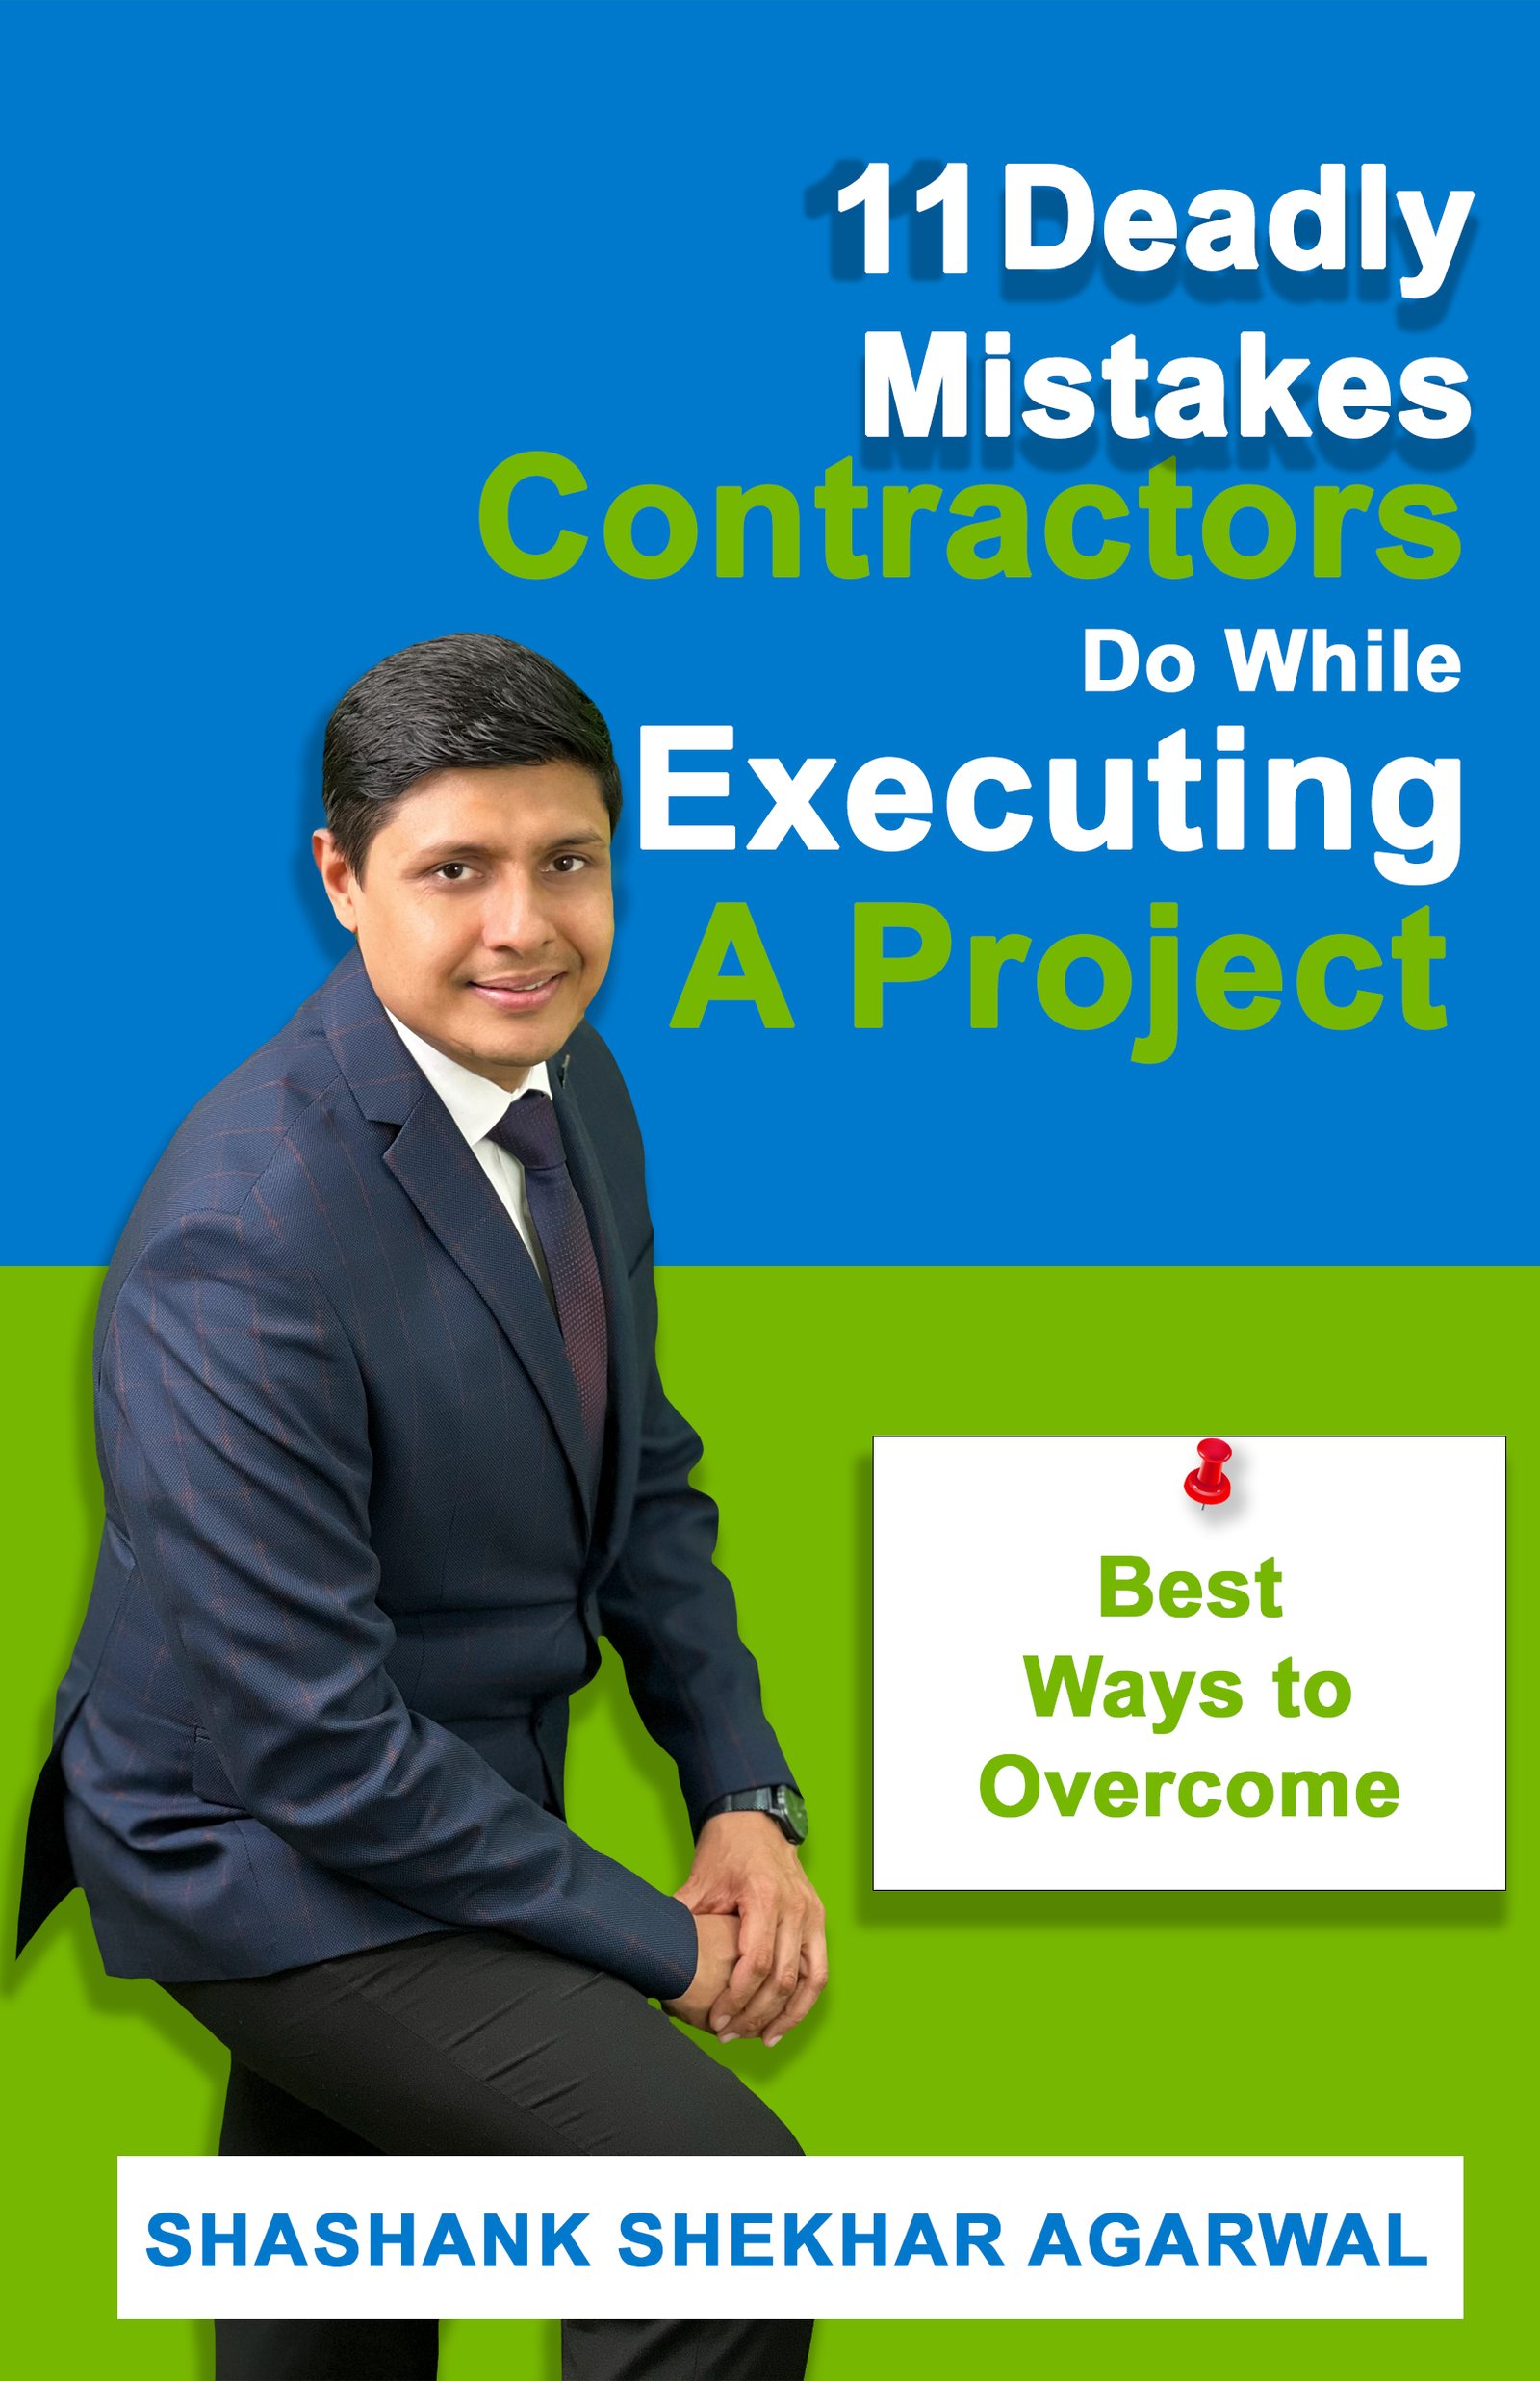 11 Deadly Mistakes Contractors Make While Executing A Project	by (Shashank Shekhar Agarwal)